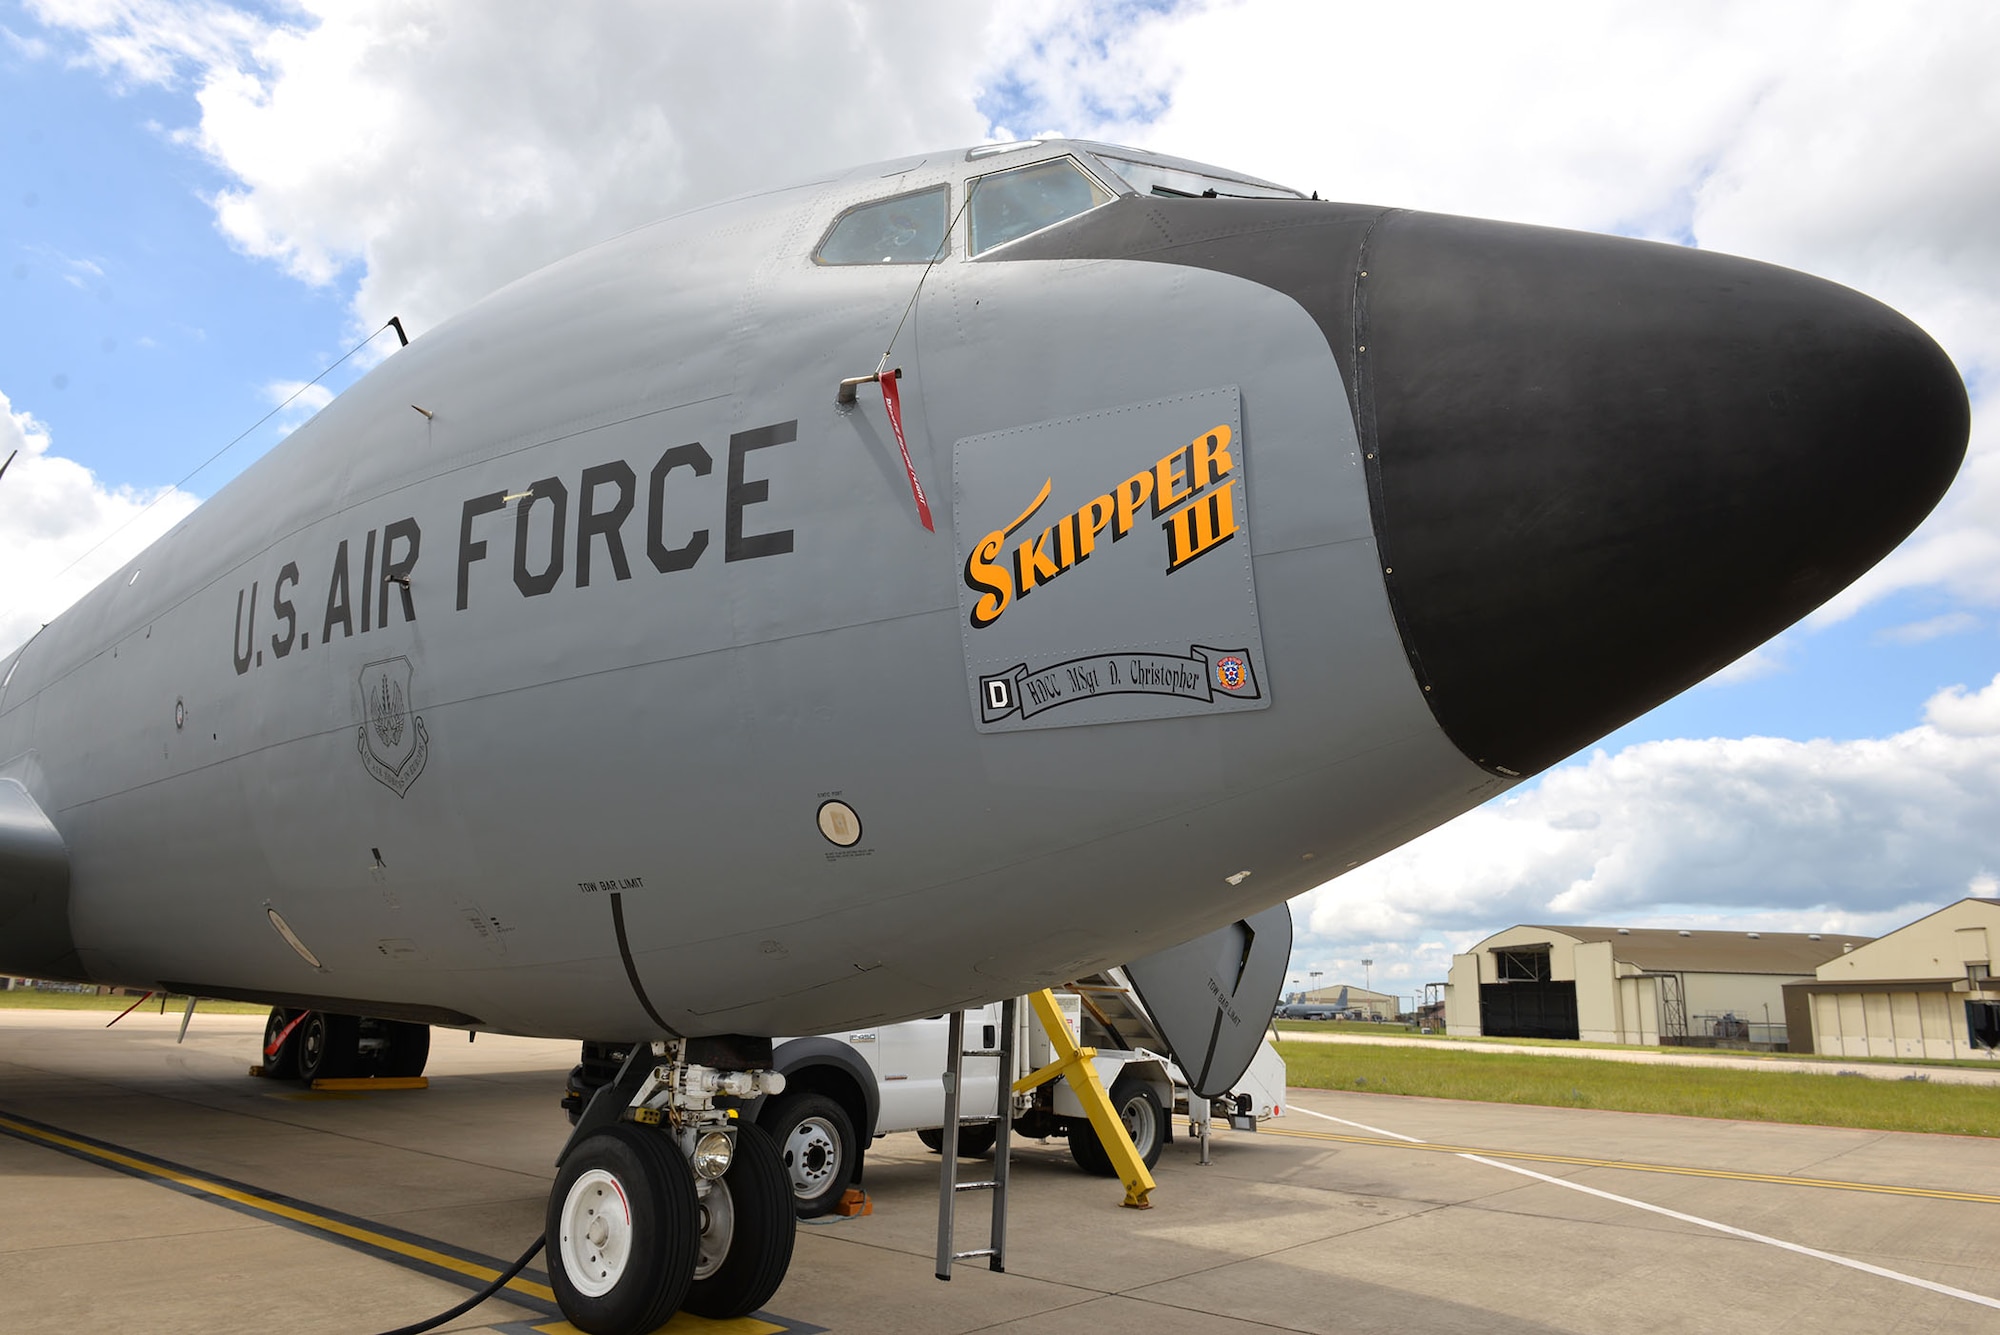 The 100th Air Refueling Wing lead jet displays special nose art of “Skipper III” in honor of retired Master Sgt. Dewey Christopher, a former 351st Bomb Squadron crew chief, 100th Bomb Group and World War II veteran, when he visited RAF Mildenhall, England, June 21, 2019. The Professional Development Center was renamed the “Dewey R. Christopher Professional Development Center” to honor the legacy of the veteran, who was guest of honor at the event. (U.S. Air Force photo by Karen Abeyasekere)